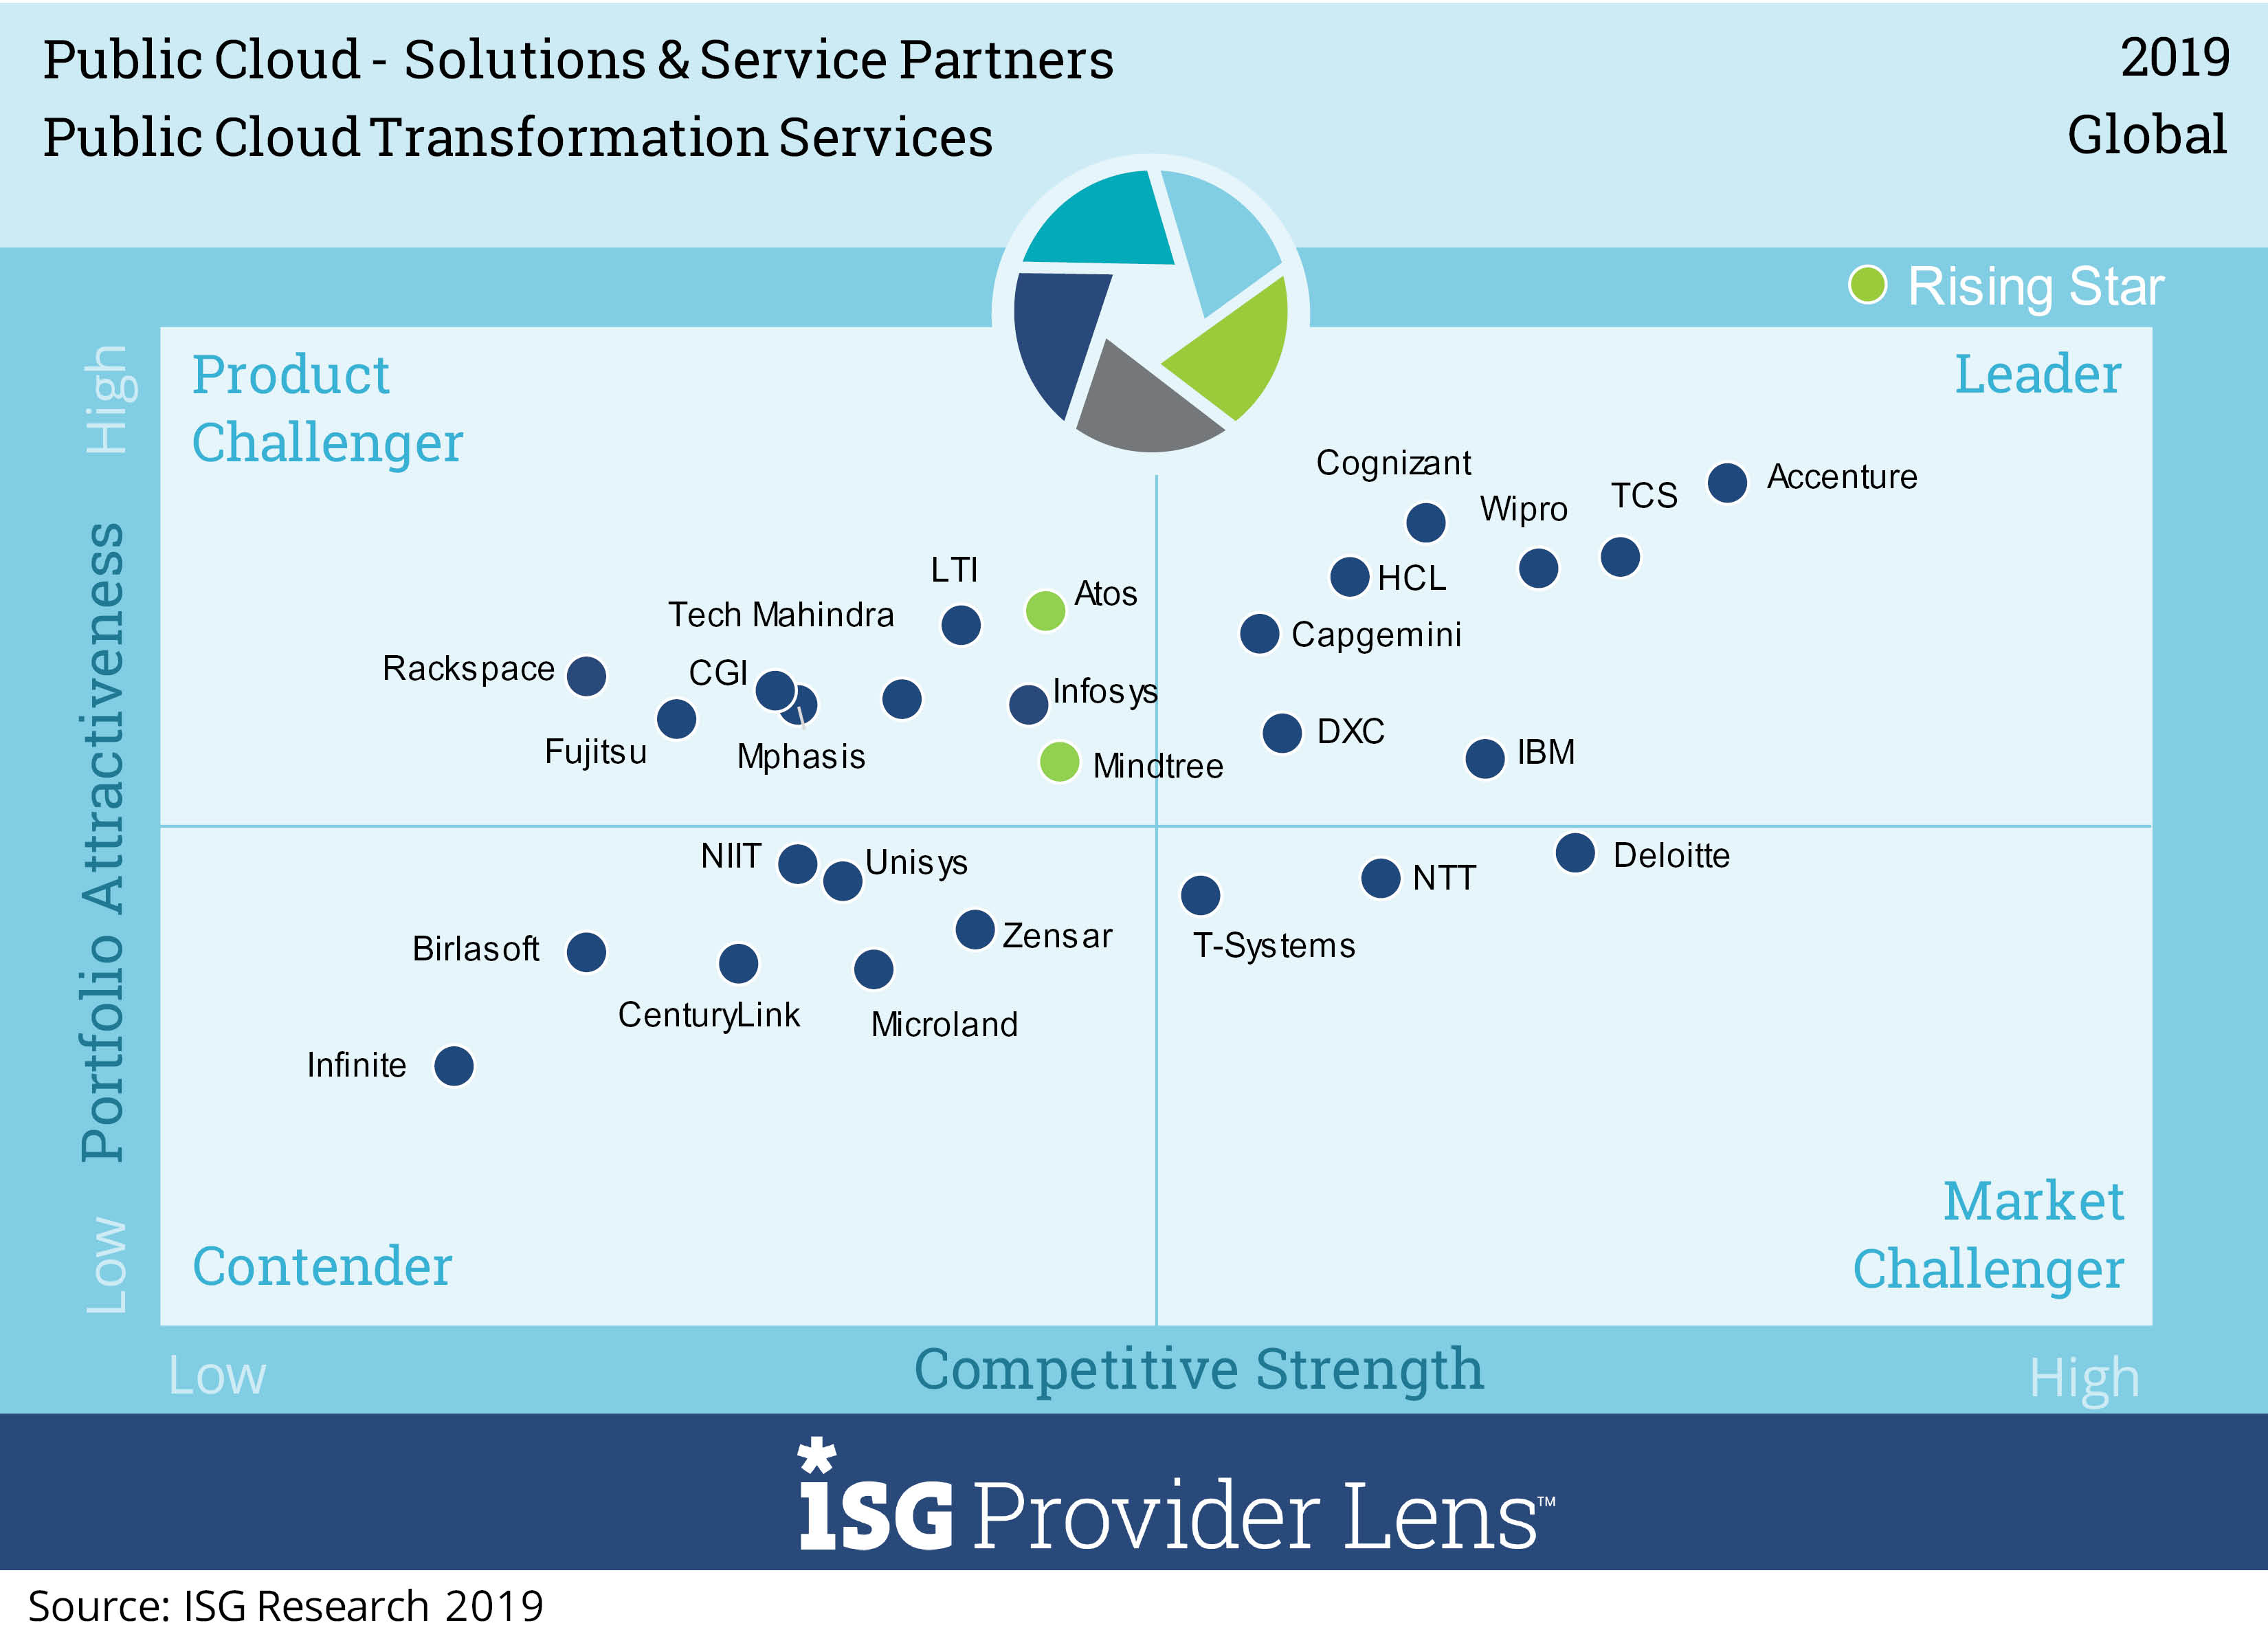 Wipro has been positioned as a Global Leader in Public Cloud – Solutions & Service Partners - ISG Provider Lens™ study 2019